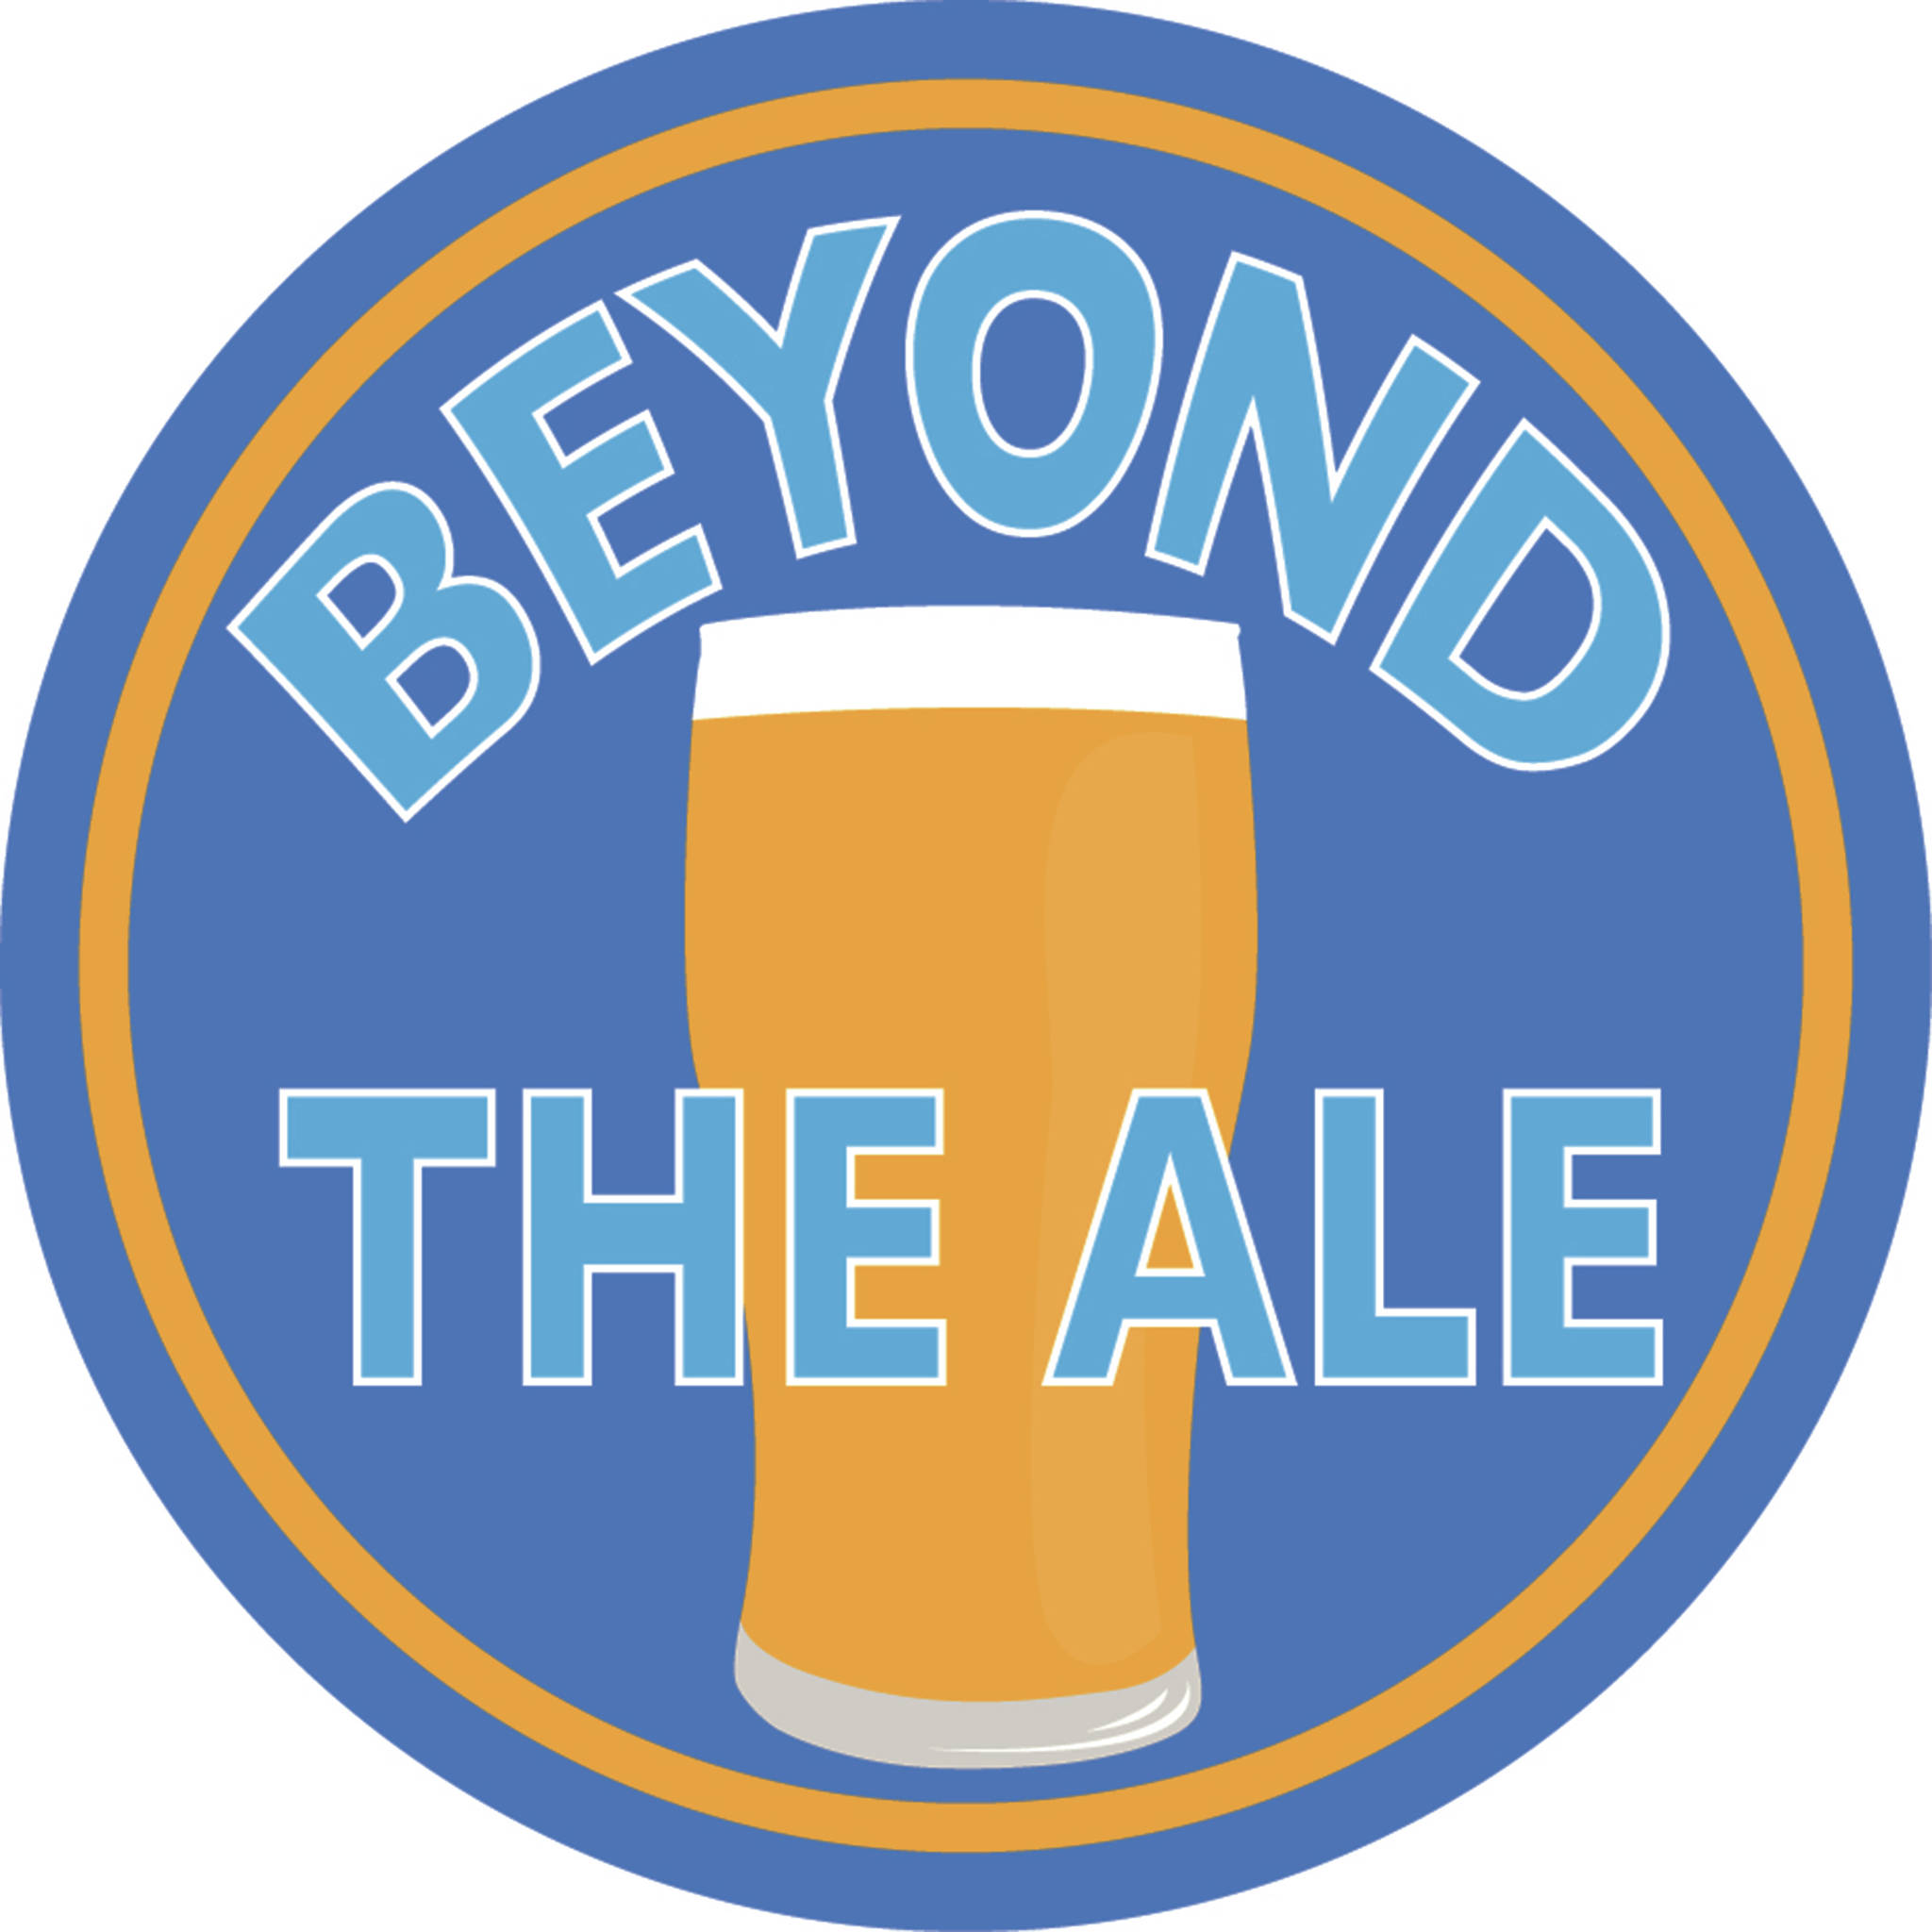 Beyond The Ale: Tucked-away Bubble Room fare fit for discerning patrons